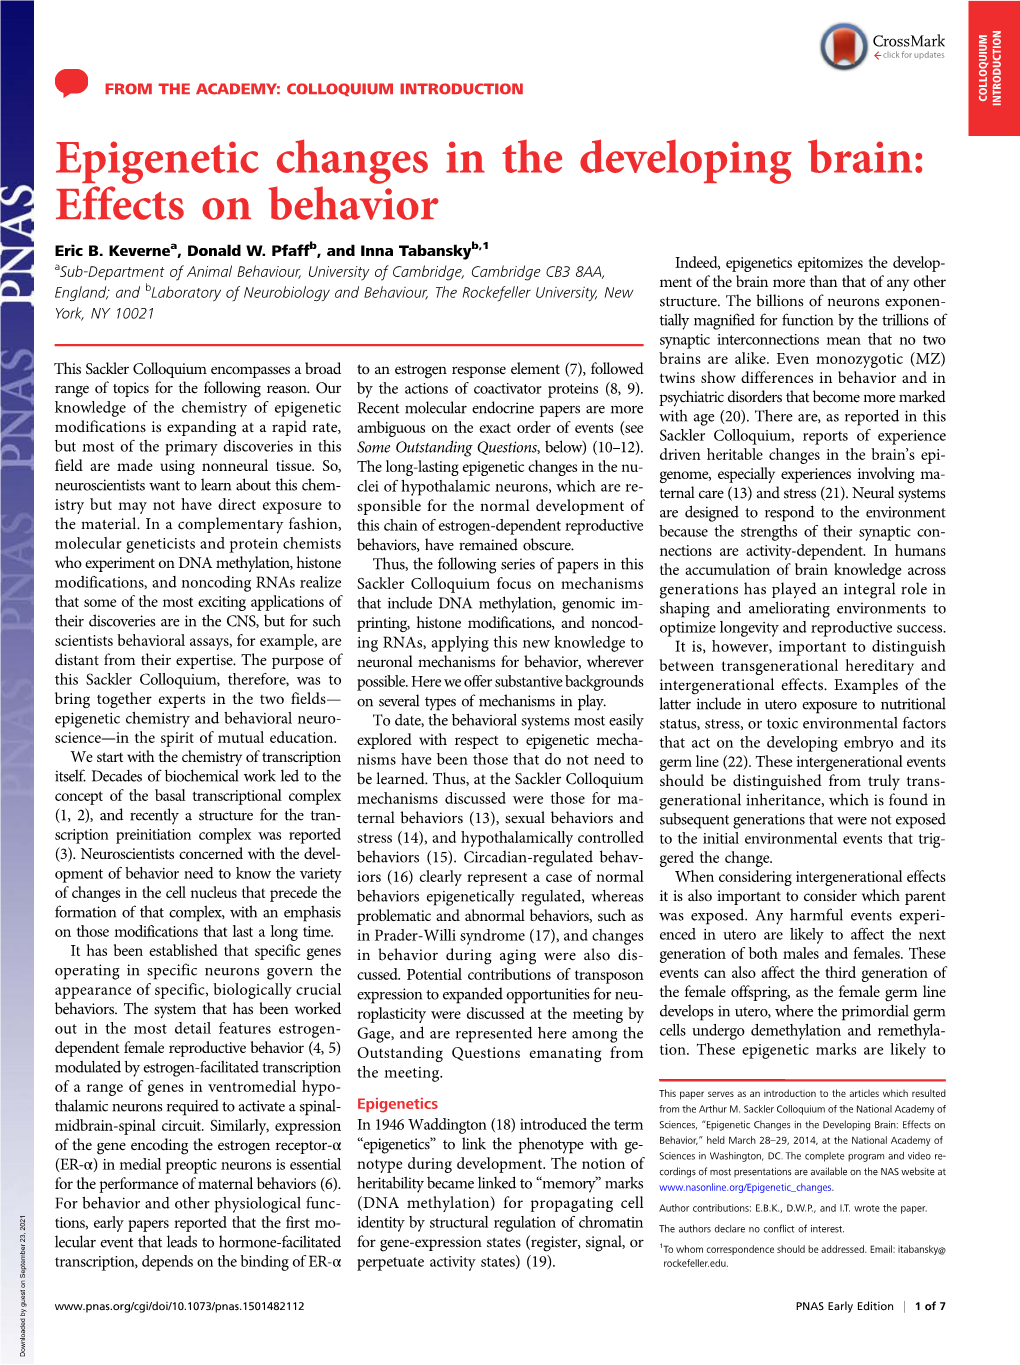 Epigenetic Changes in the Developing Brain: Effects on Behavior Eric B